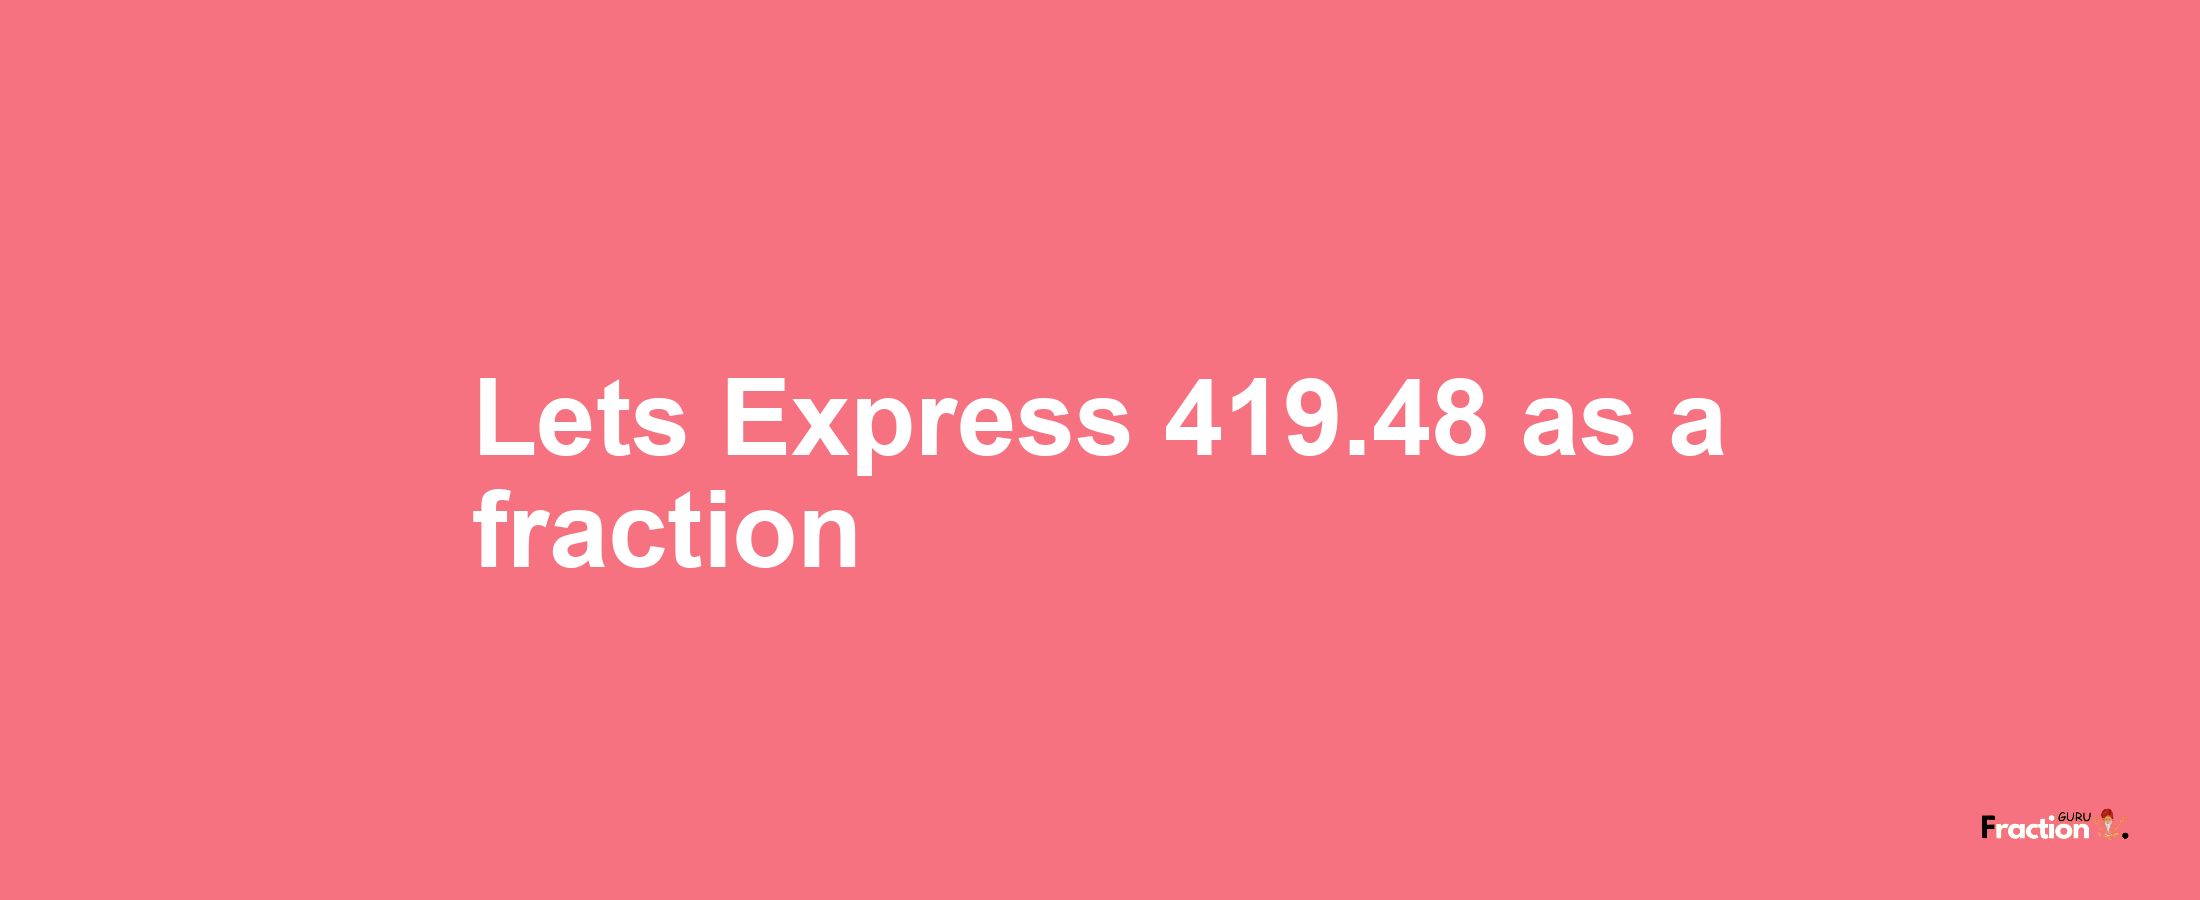 Lets Express 419.48 as afraction